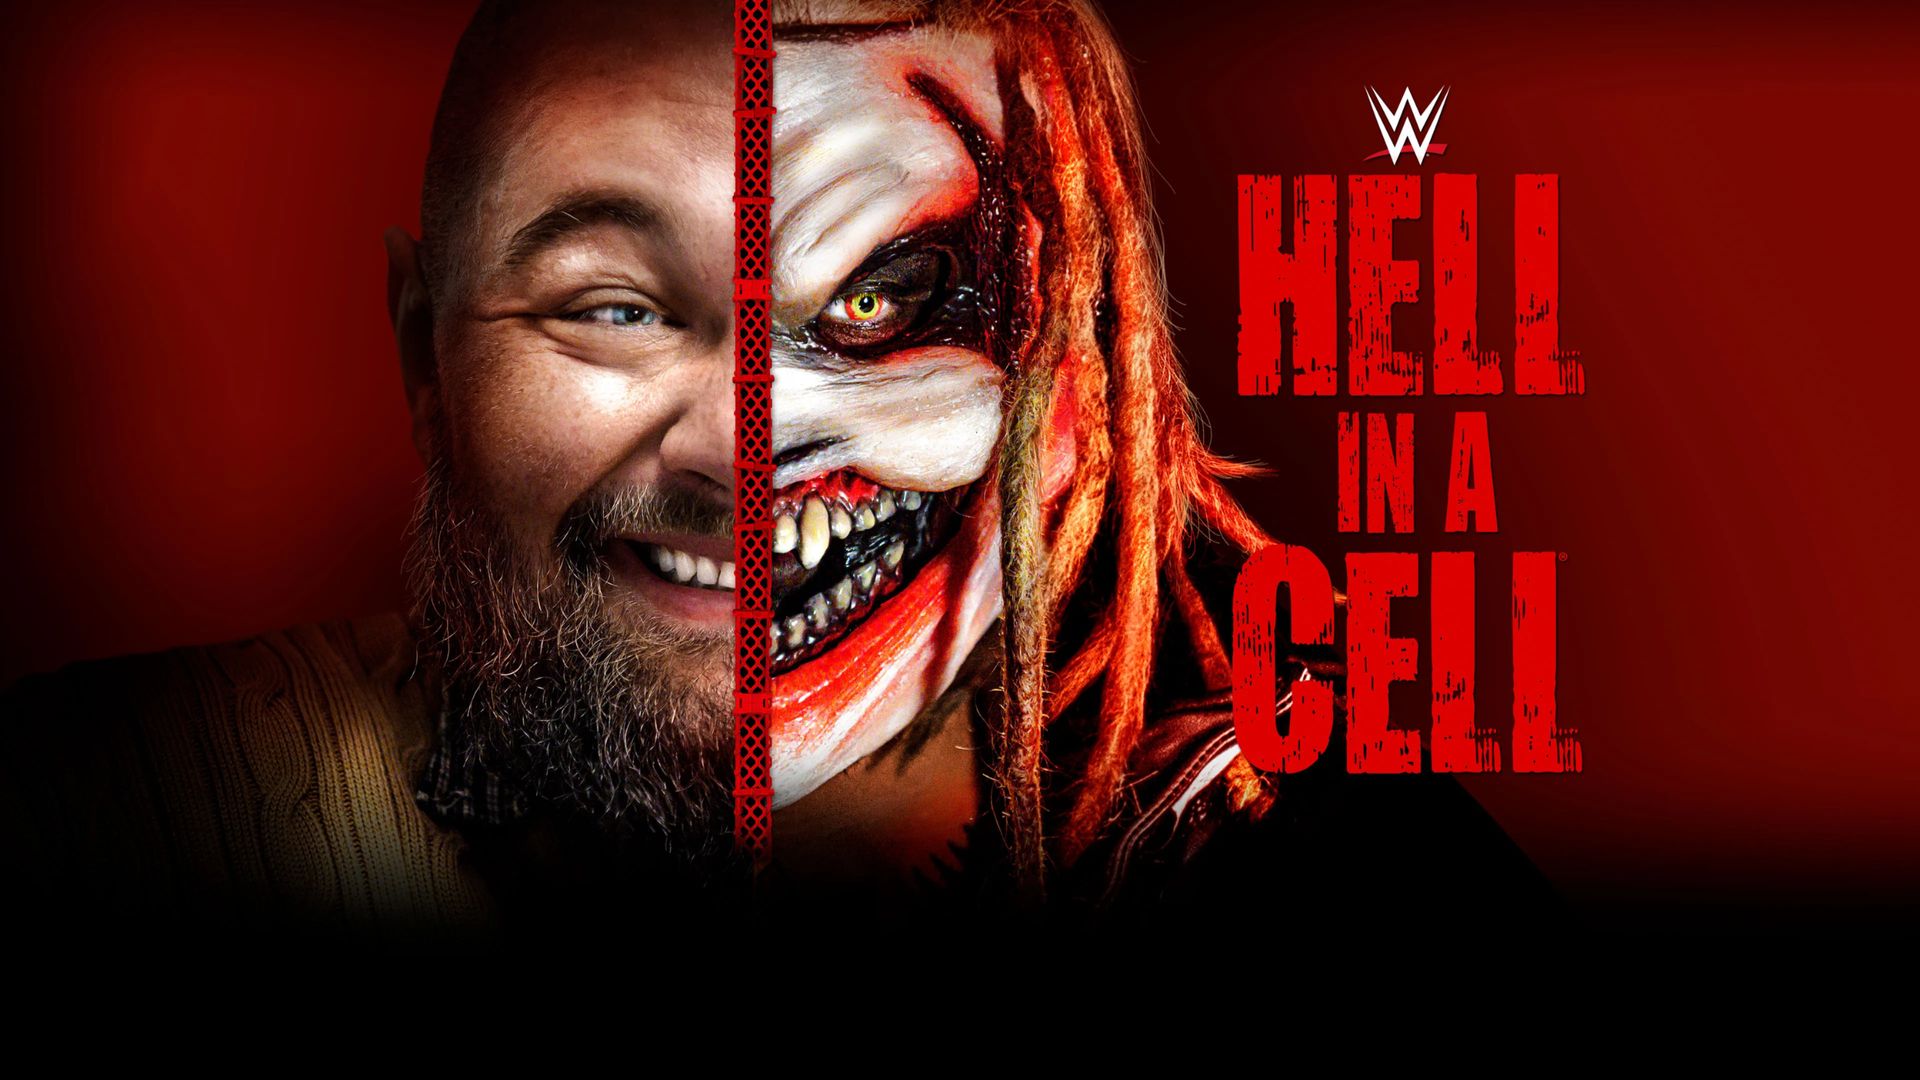 WWE Hell in a Cell background